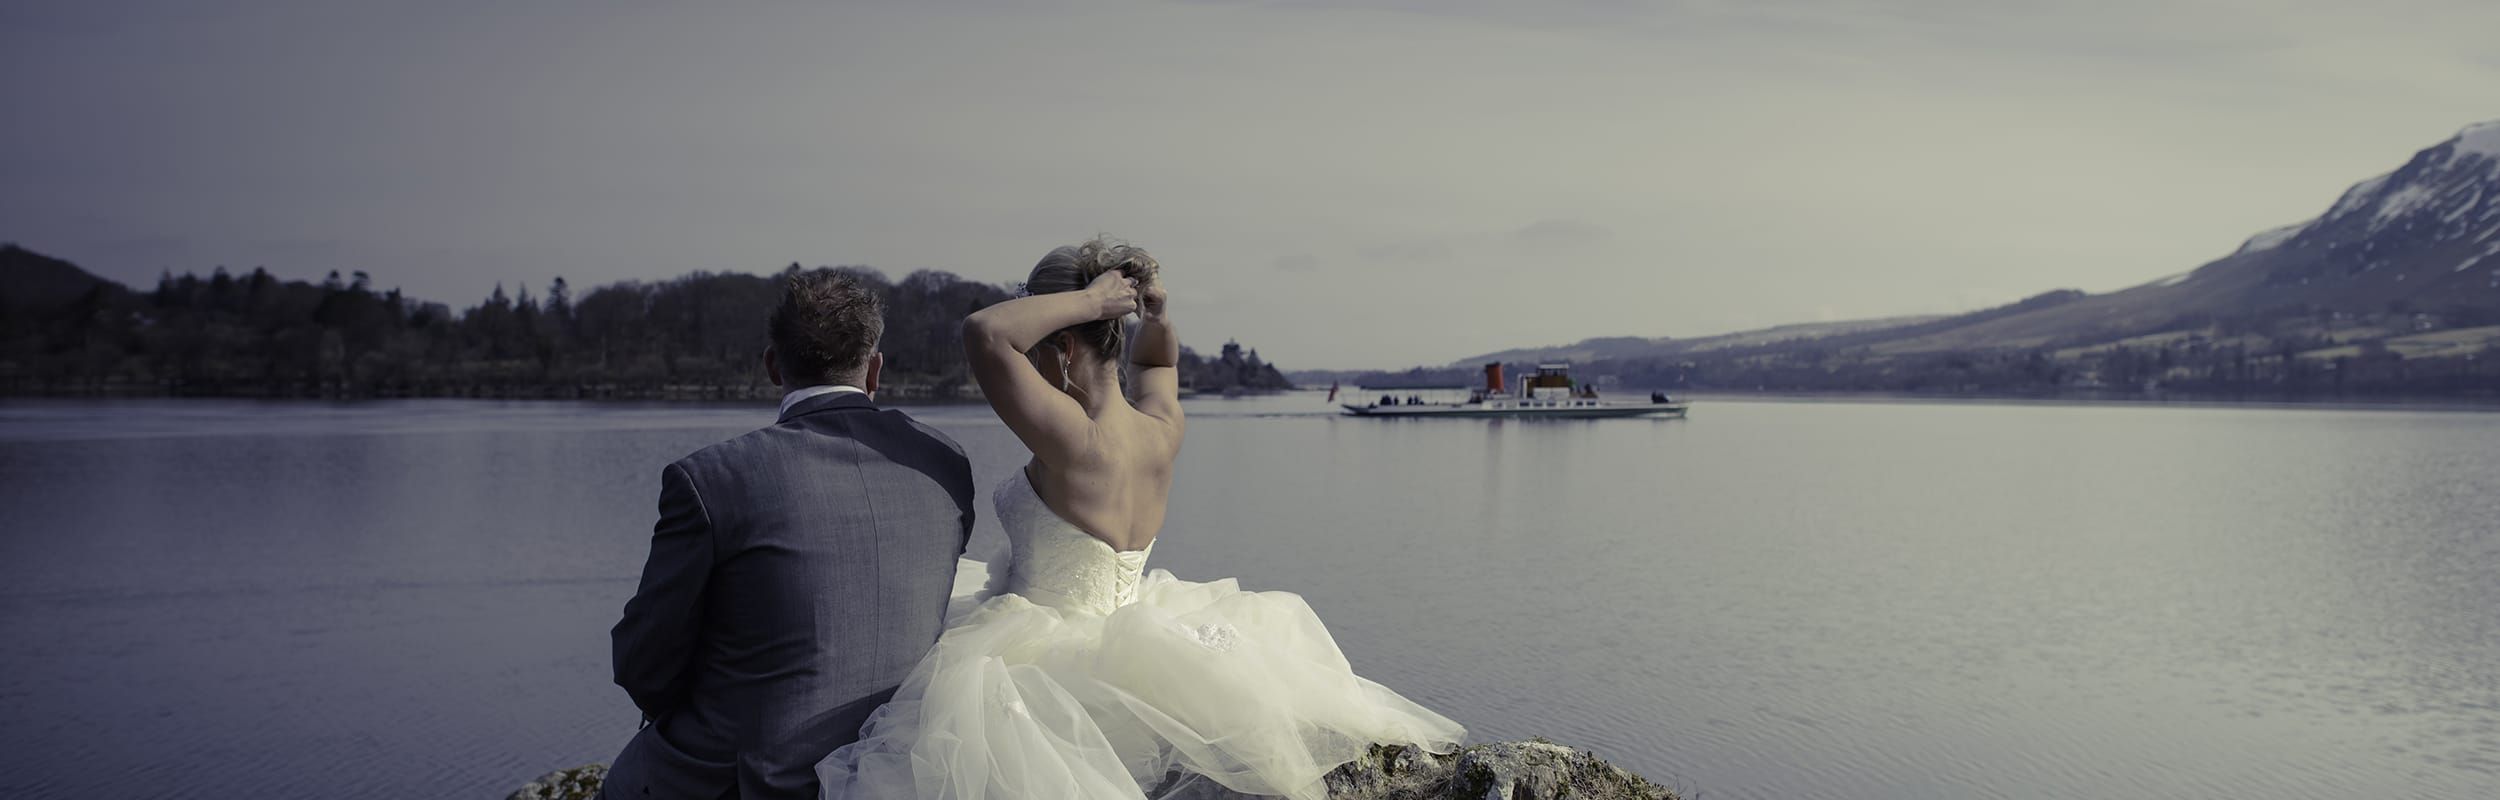 Wedding in the Lake District with Ullswater 'Steamer' M.Y. Lady of the Lake